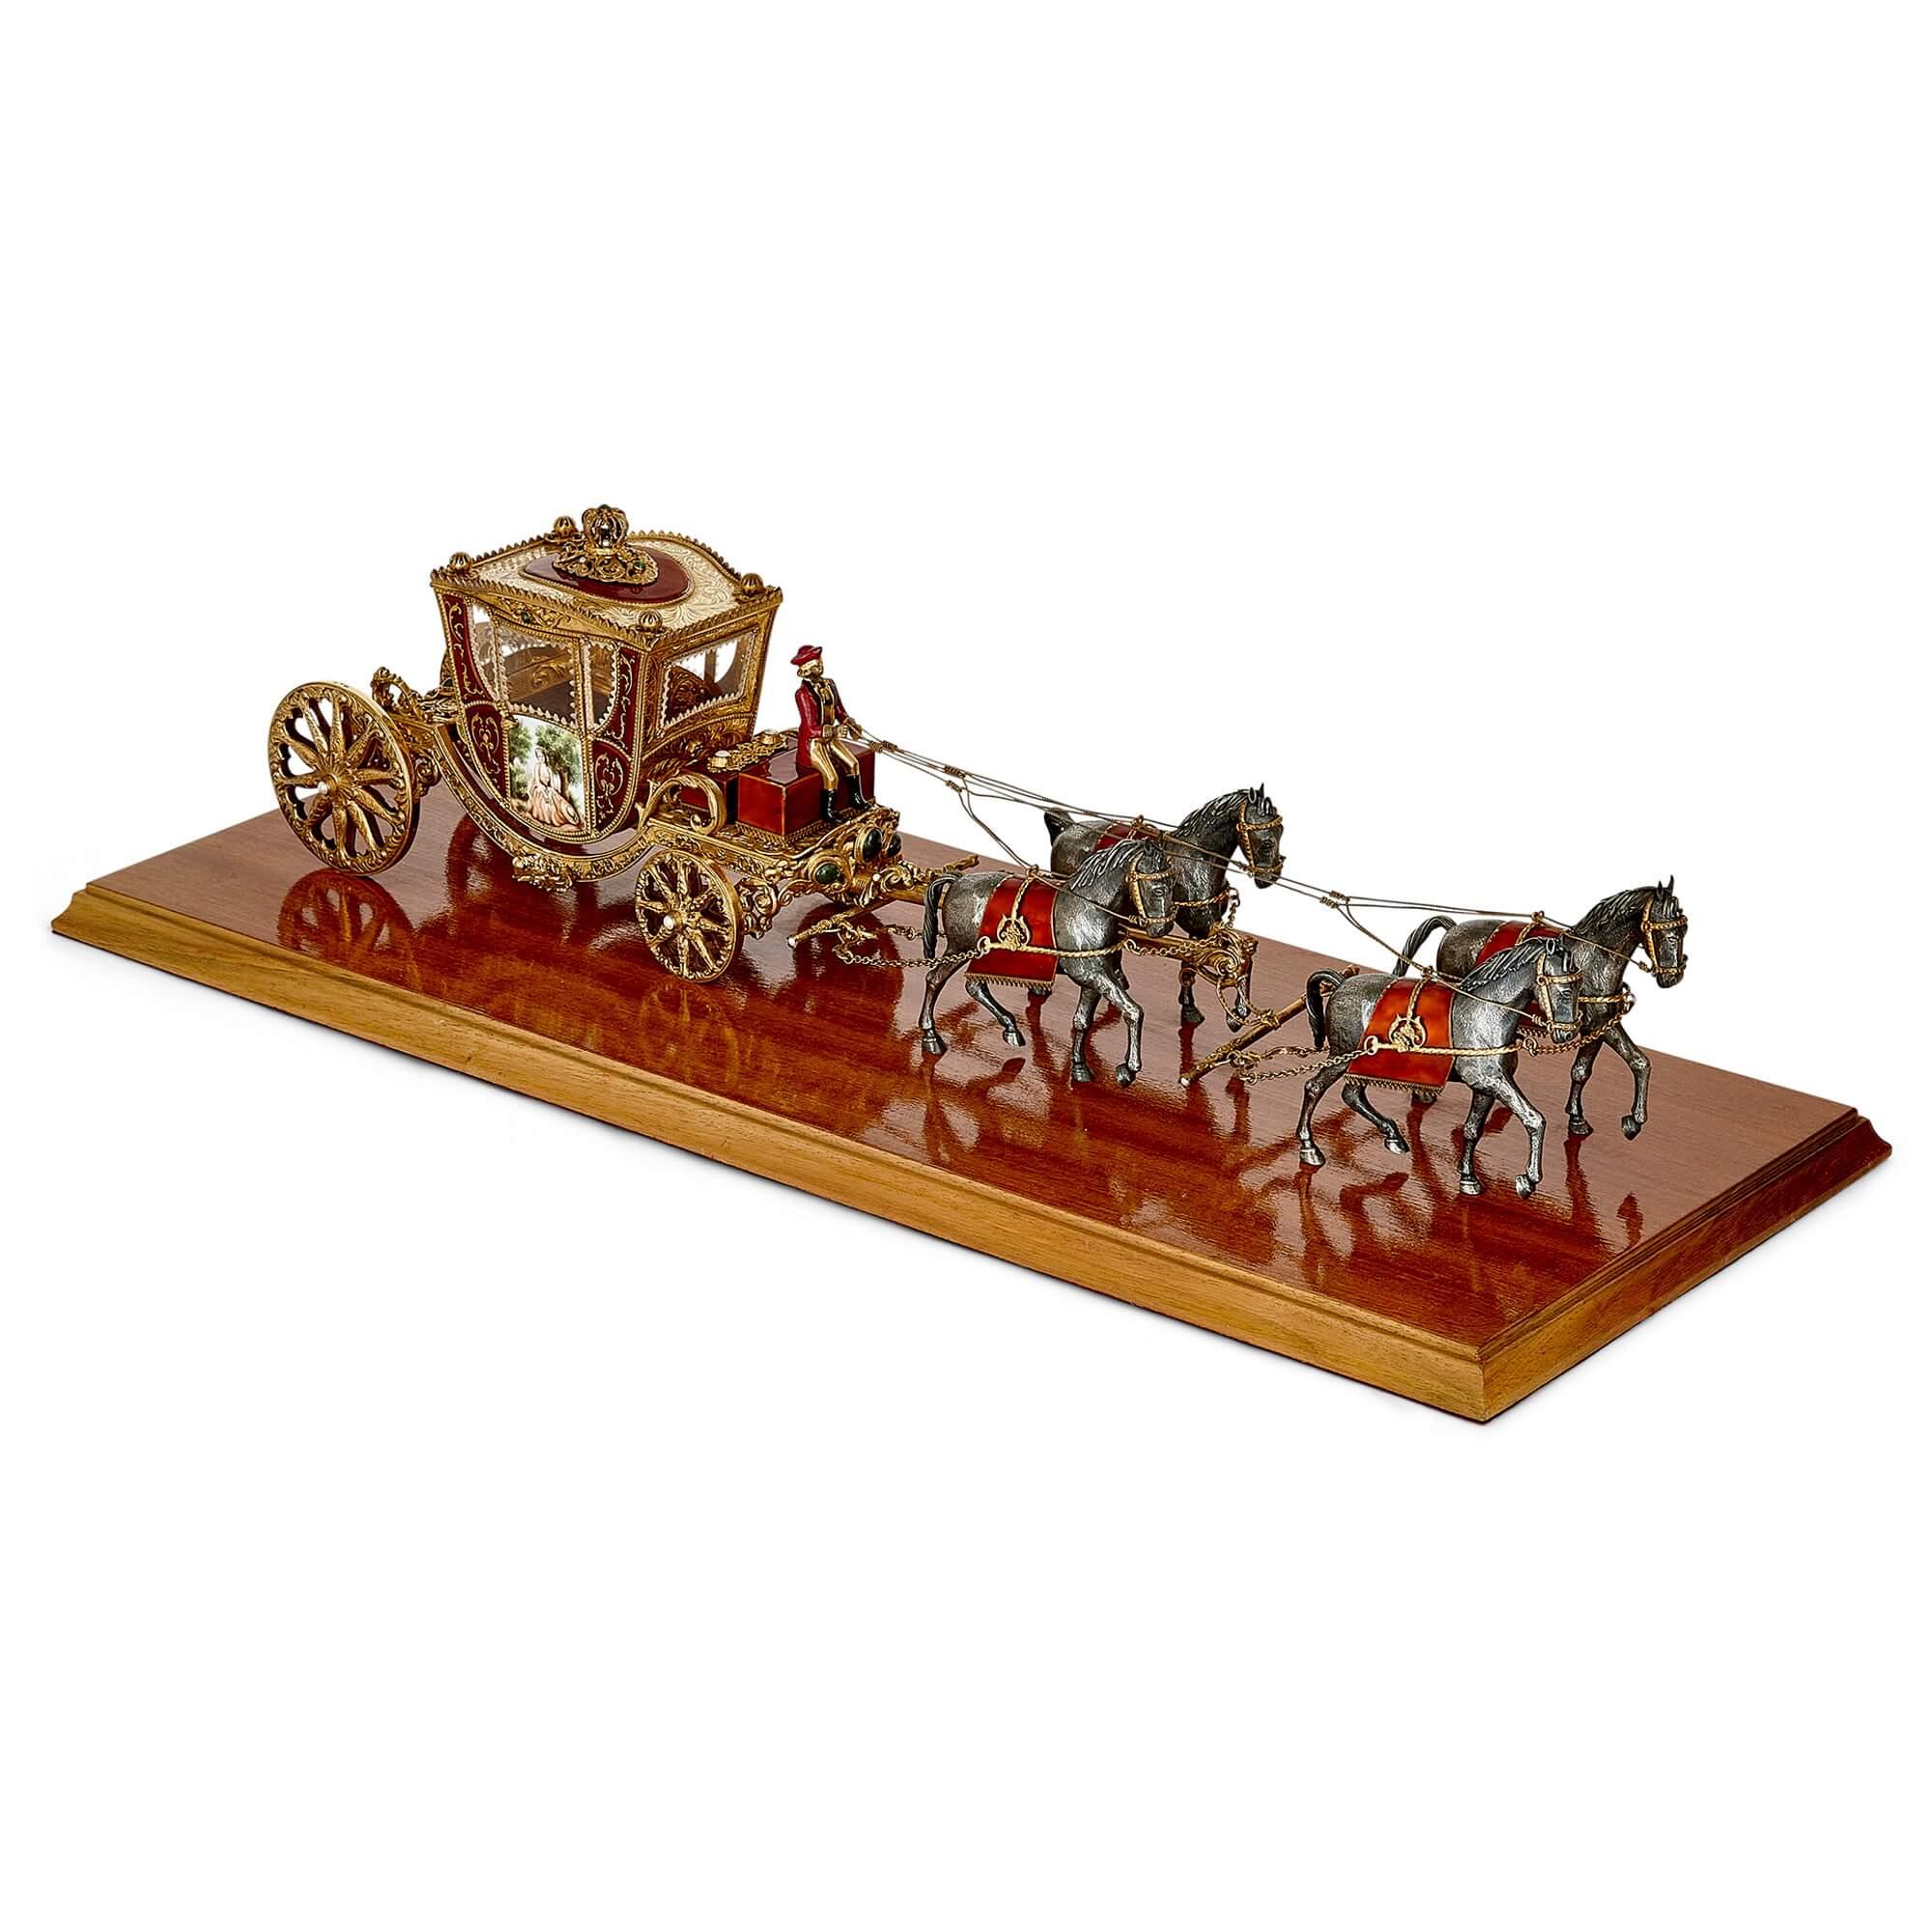 A silver-gilt and enamel Austro-Hungarian horse drawn carriage model
Austro-Hungarian, Early 20th Century
Case: 28cm high x 89cm wide x 44cm depth.
Horse & carriage: 20cm high x 73.5cm wide x 29cm depth. 

This superb objet d'art is a